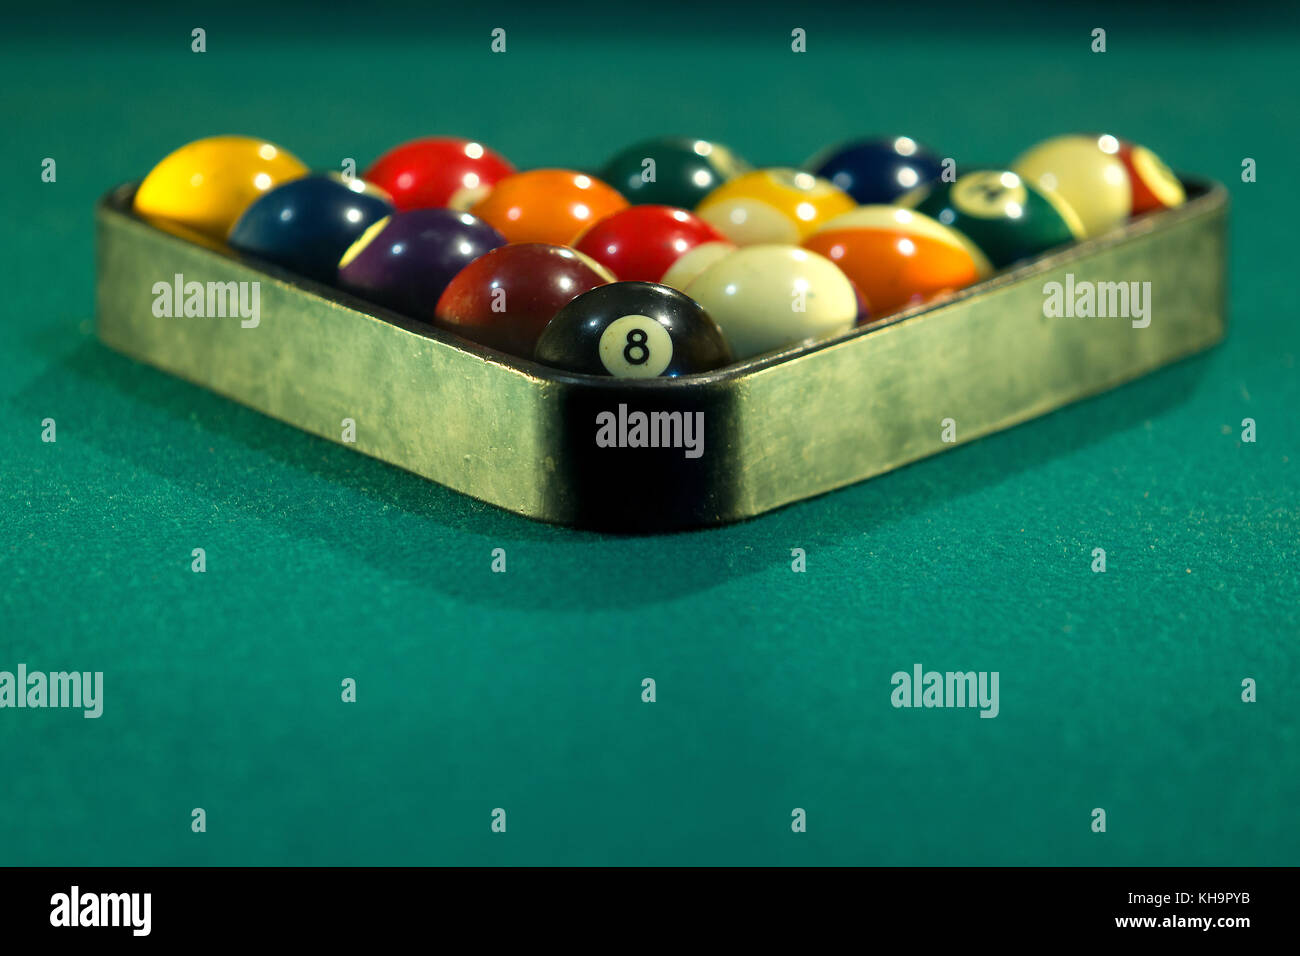 Horizontal photo of a billiard table with the billiard balls arranged in a triangle Stock Photo